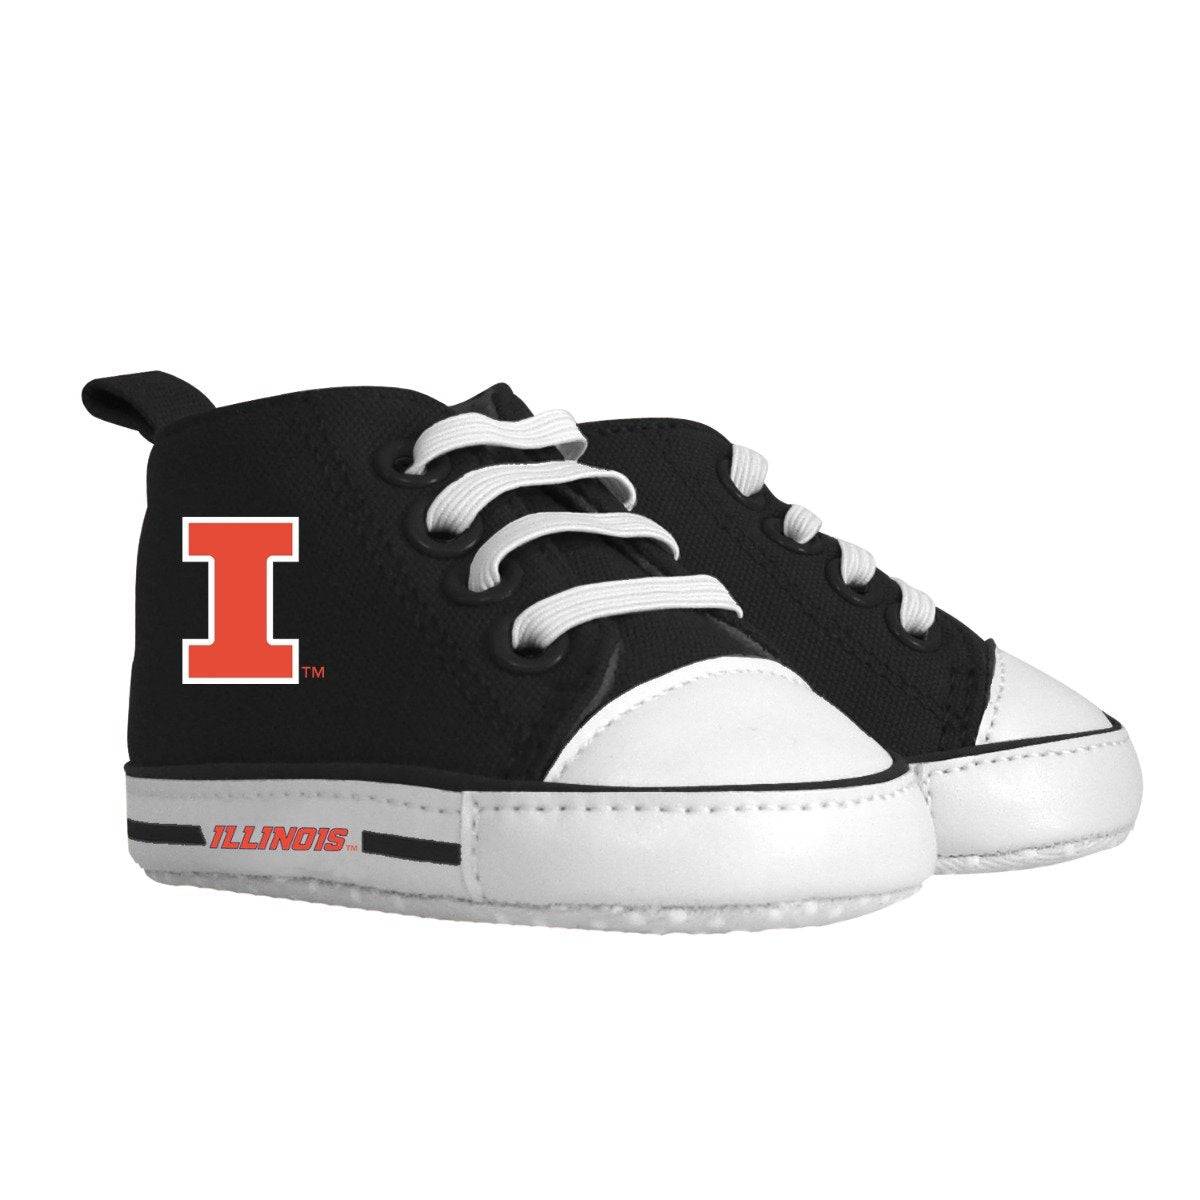 Ohio State Pre-walker Shoes